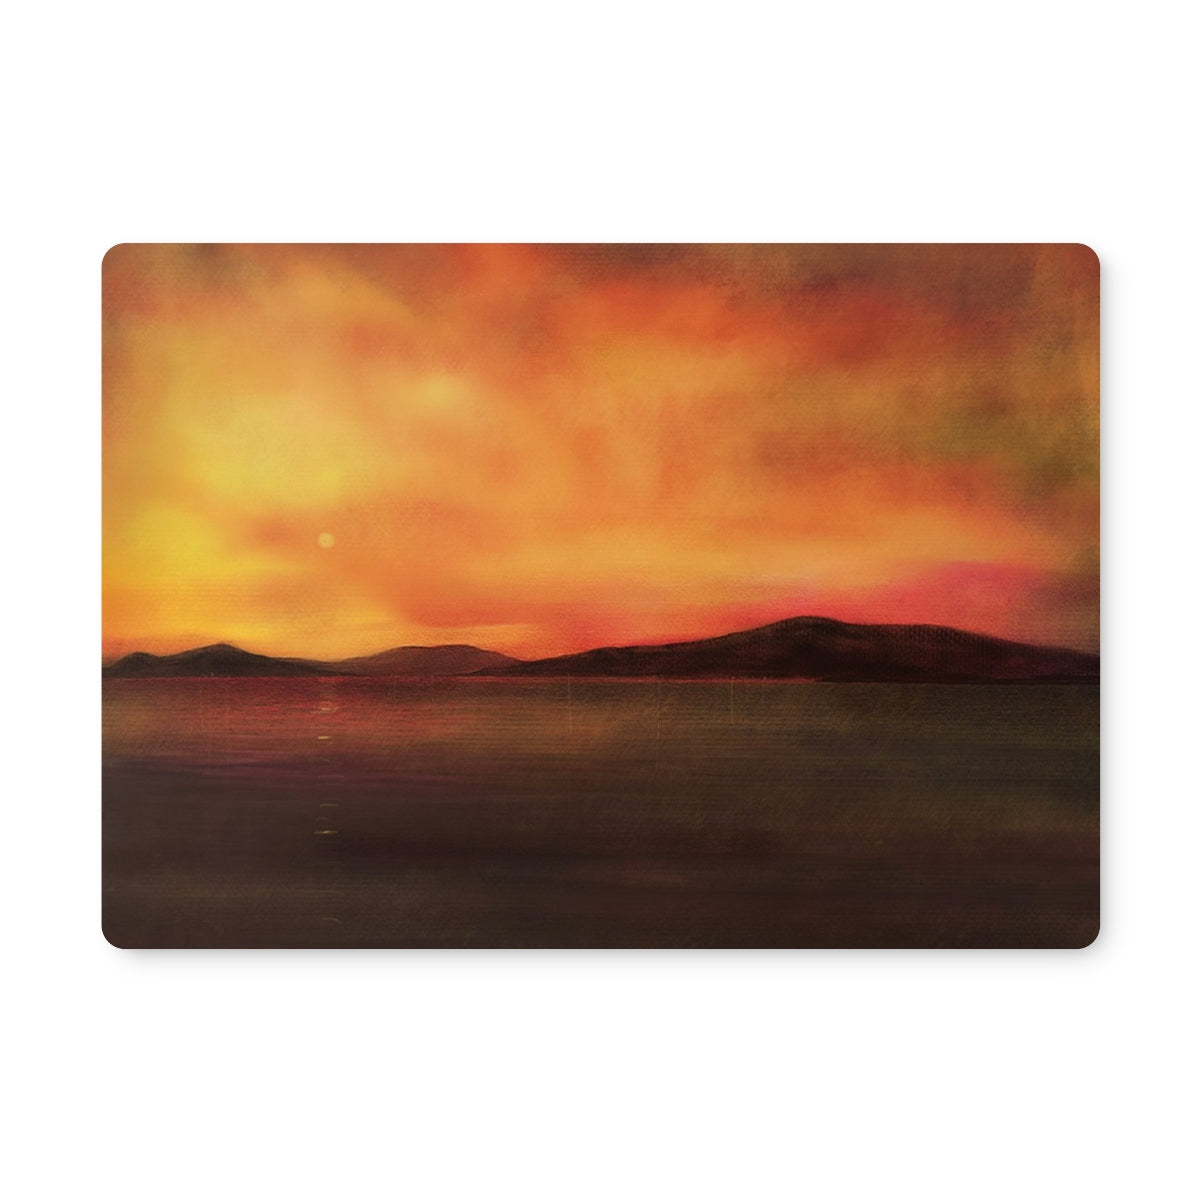 Harris Sunset Art Gifts Placemat-Placemats-Hebridean Islands Art Gallery-4 Placemats-Paintings, Prints, Homeware, Art Gifts From Scotland By Scottish Artist Kevin Hunter